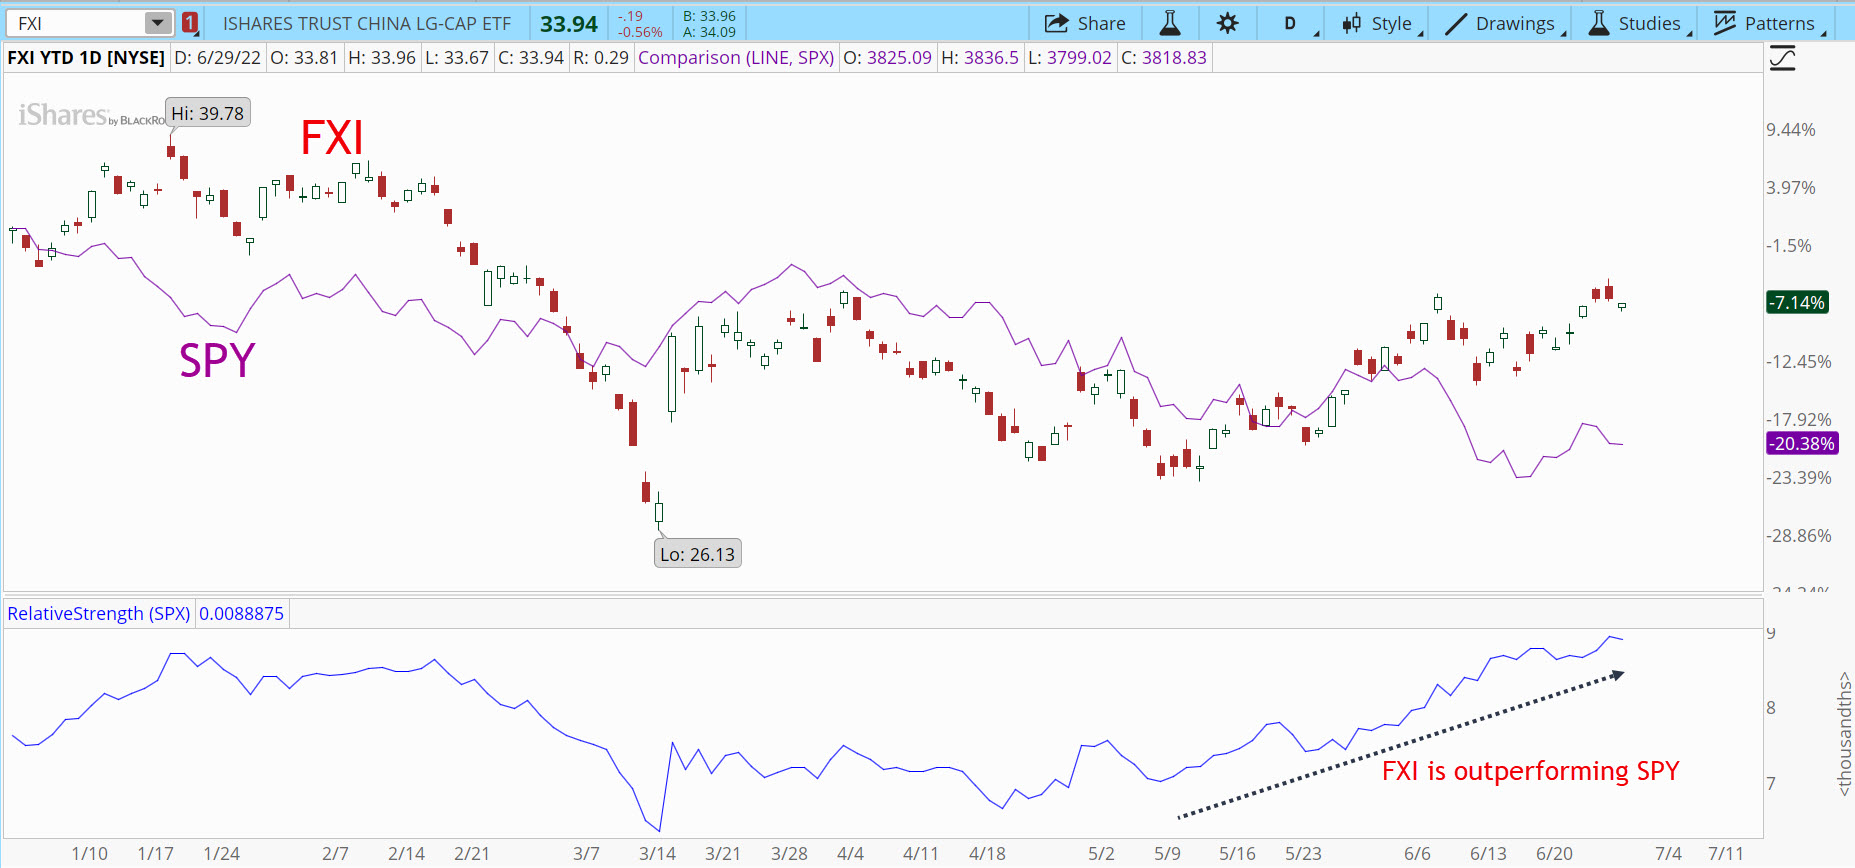 China Large-Cap ETF (FXI) stock chart is outperforming the S&P 500.